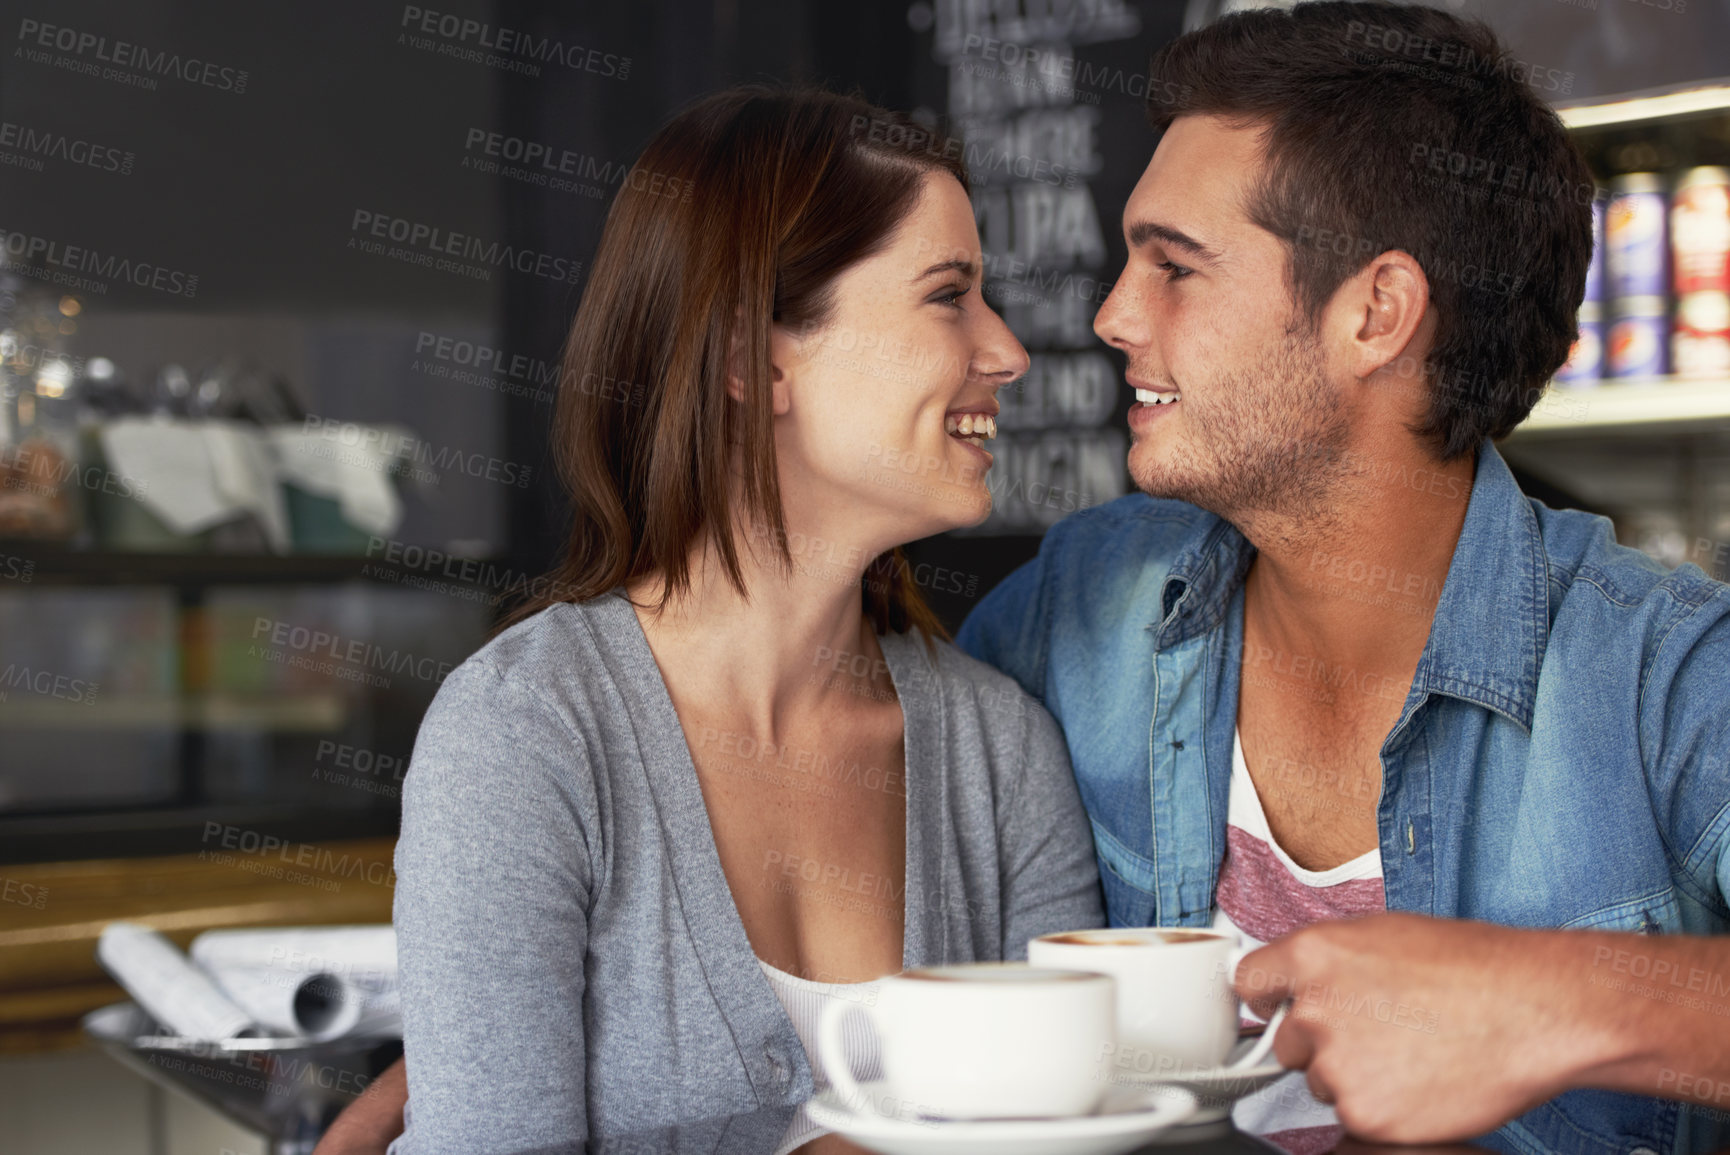 Buy stock photo Smile, shop and couple drinking coffee in cafe, care and bonding together on valentines day date. Happy, man and woman in restaurant with latte for love connection, conversation and relationship